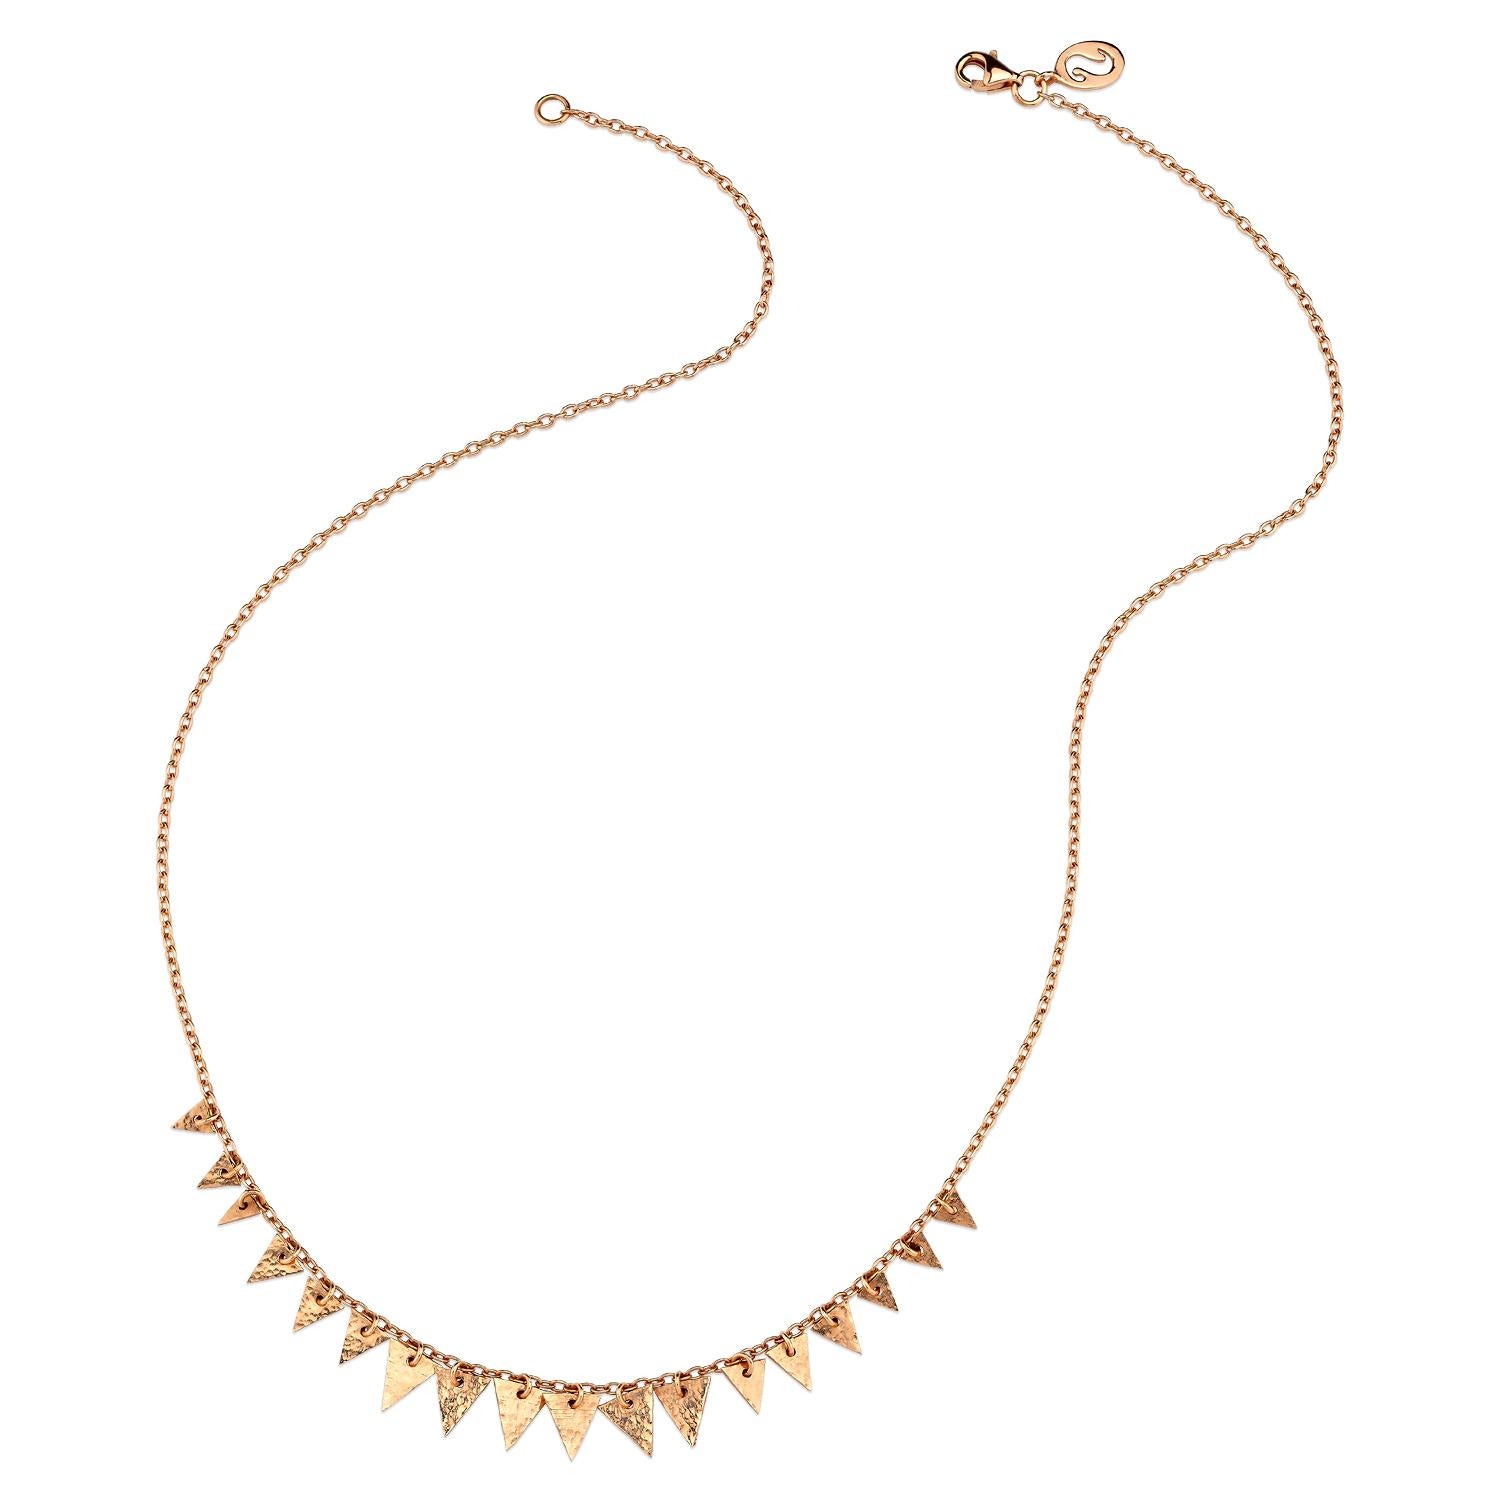 Catch you seed short necklace in 14k rose gold by Selda Jewellery

Additional Information:-
Collection: Dragon lady collection
14K Rose gold